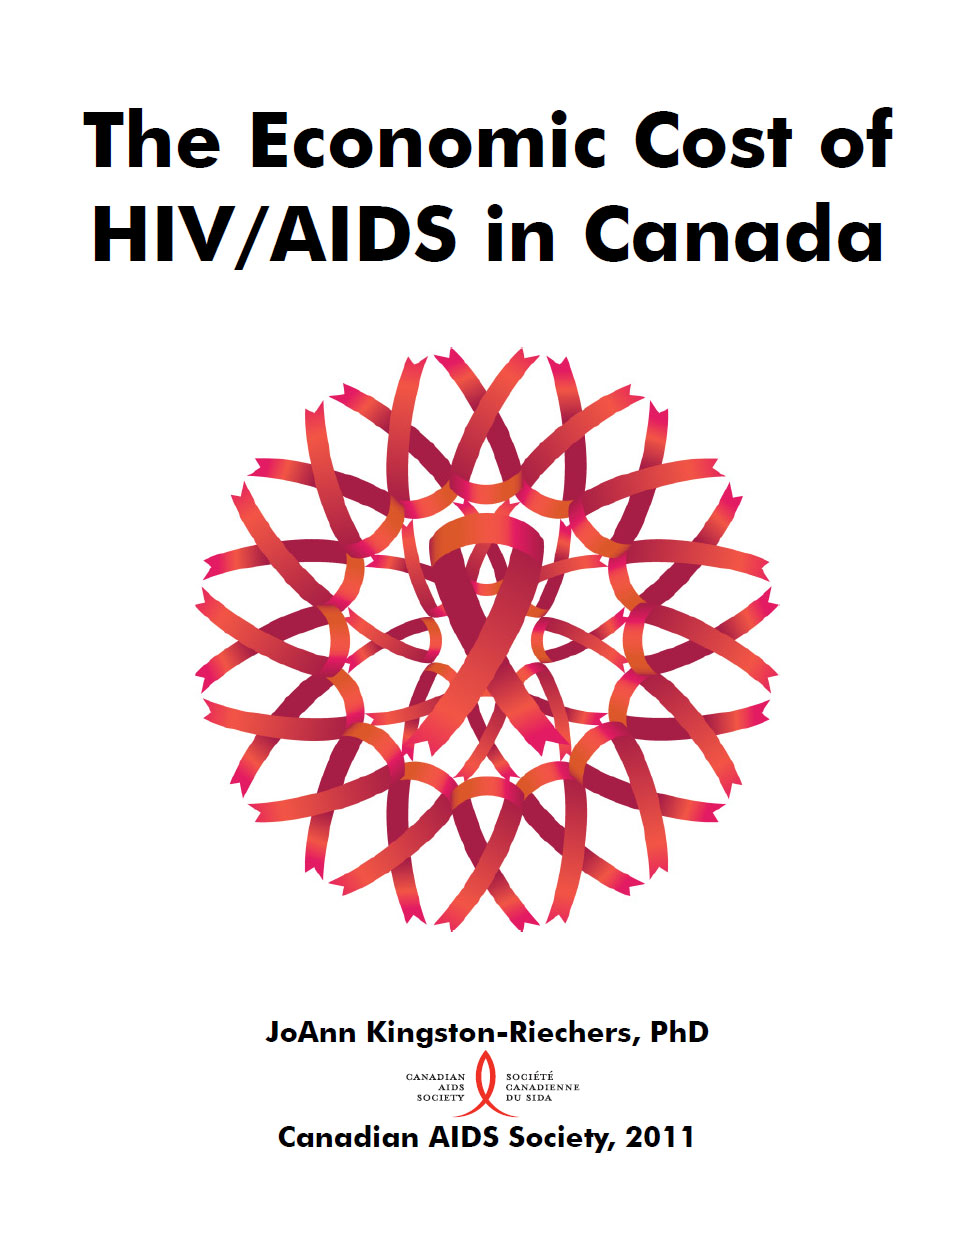 The Economic Cost of HIV/AIDS in Canada